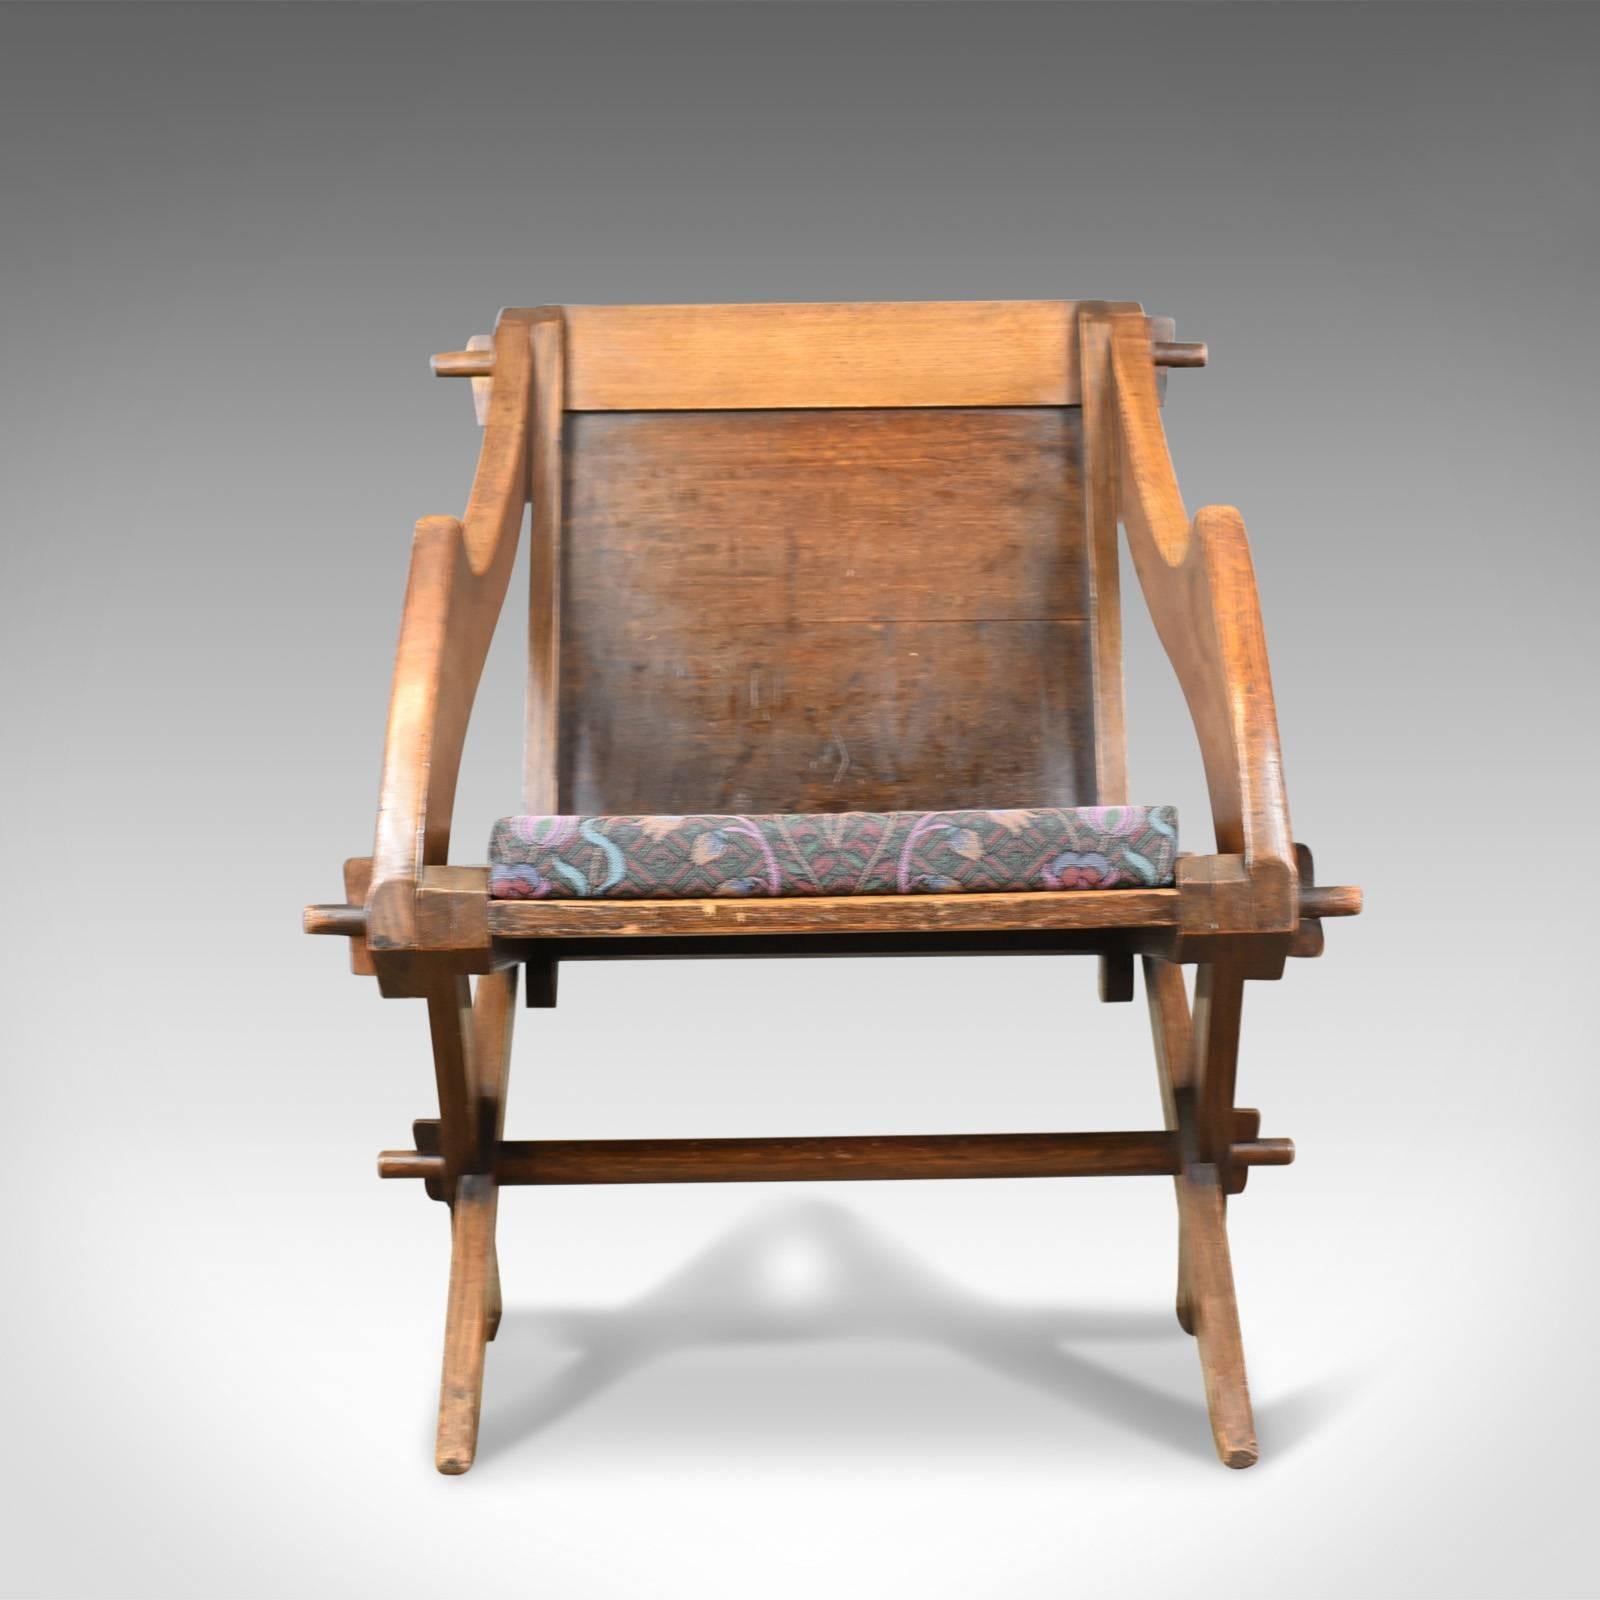 This is an antique Glastonbury chair, English Tudor Revival hall seat dating to the early 20th century, circa 1900.

A fine Glastonbury chair faithful to its origins
Exhibiting ecclesiastical and gothic overtones
Classic tusked joints, the